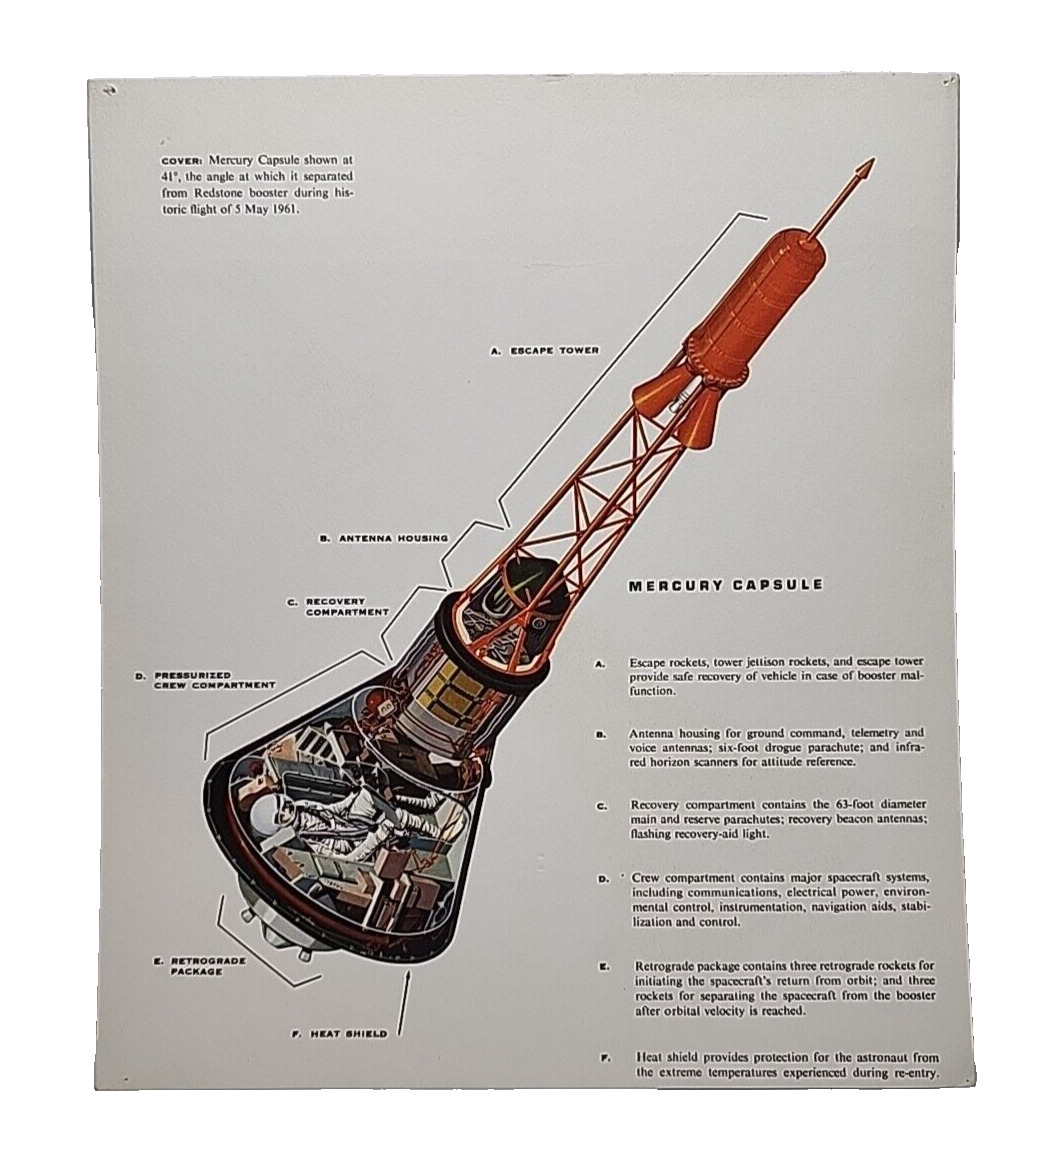 1961 NASA McDonnell Mercury Capsule 1961 Double Sided Poster Brochure RRP 19